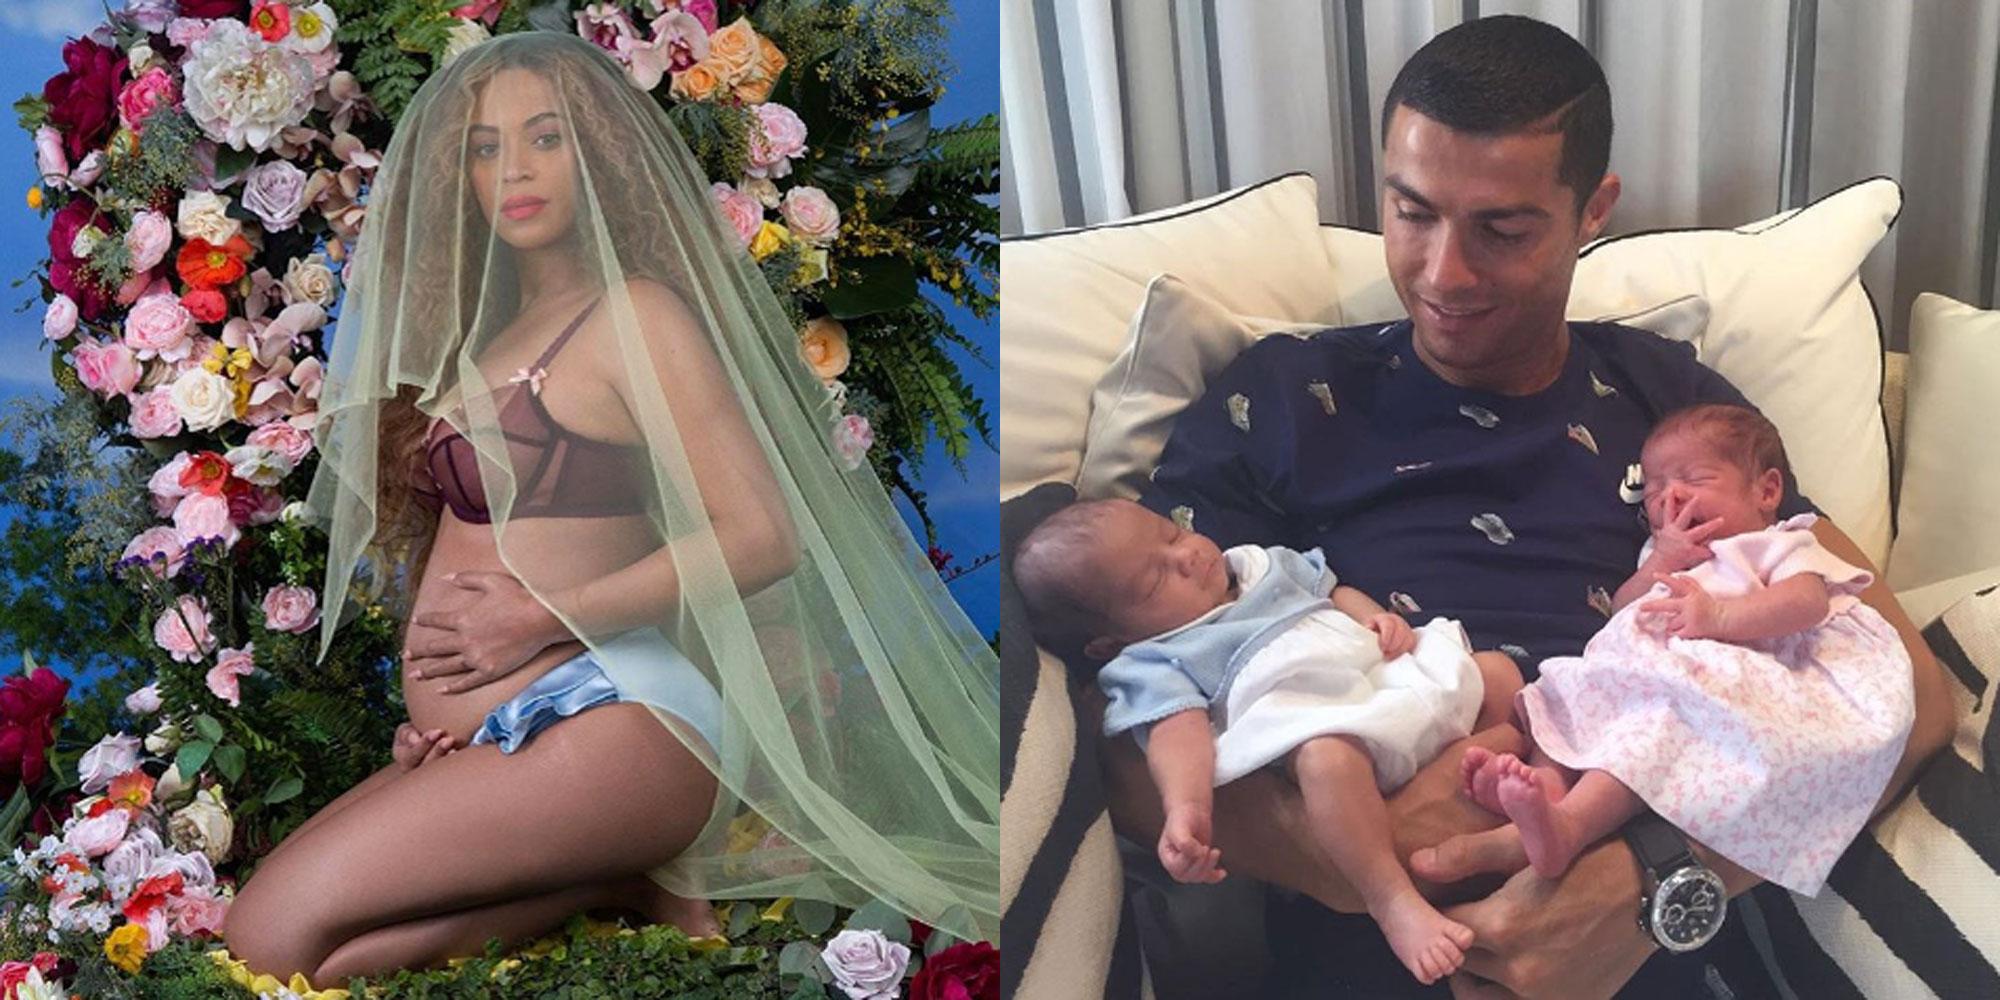 picture instagram beyonce instagram cristiano - most liked pictures on instagram